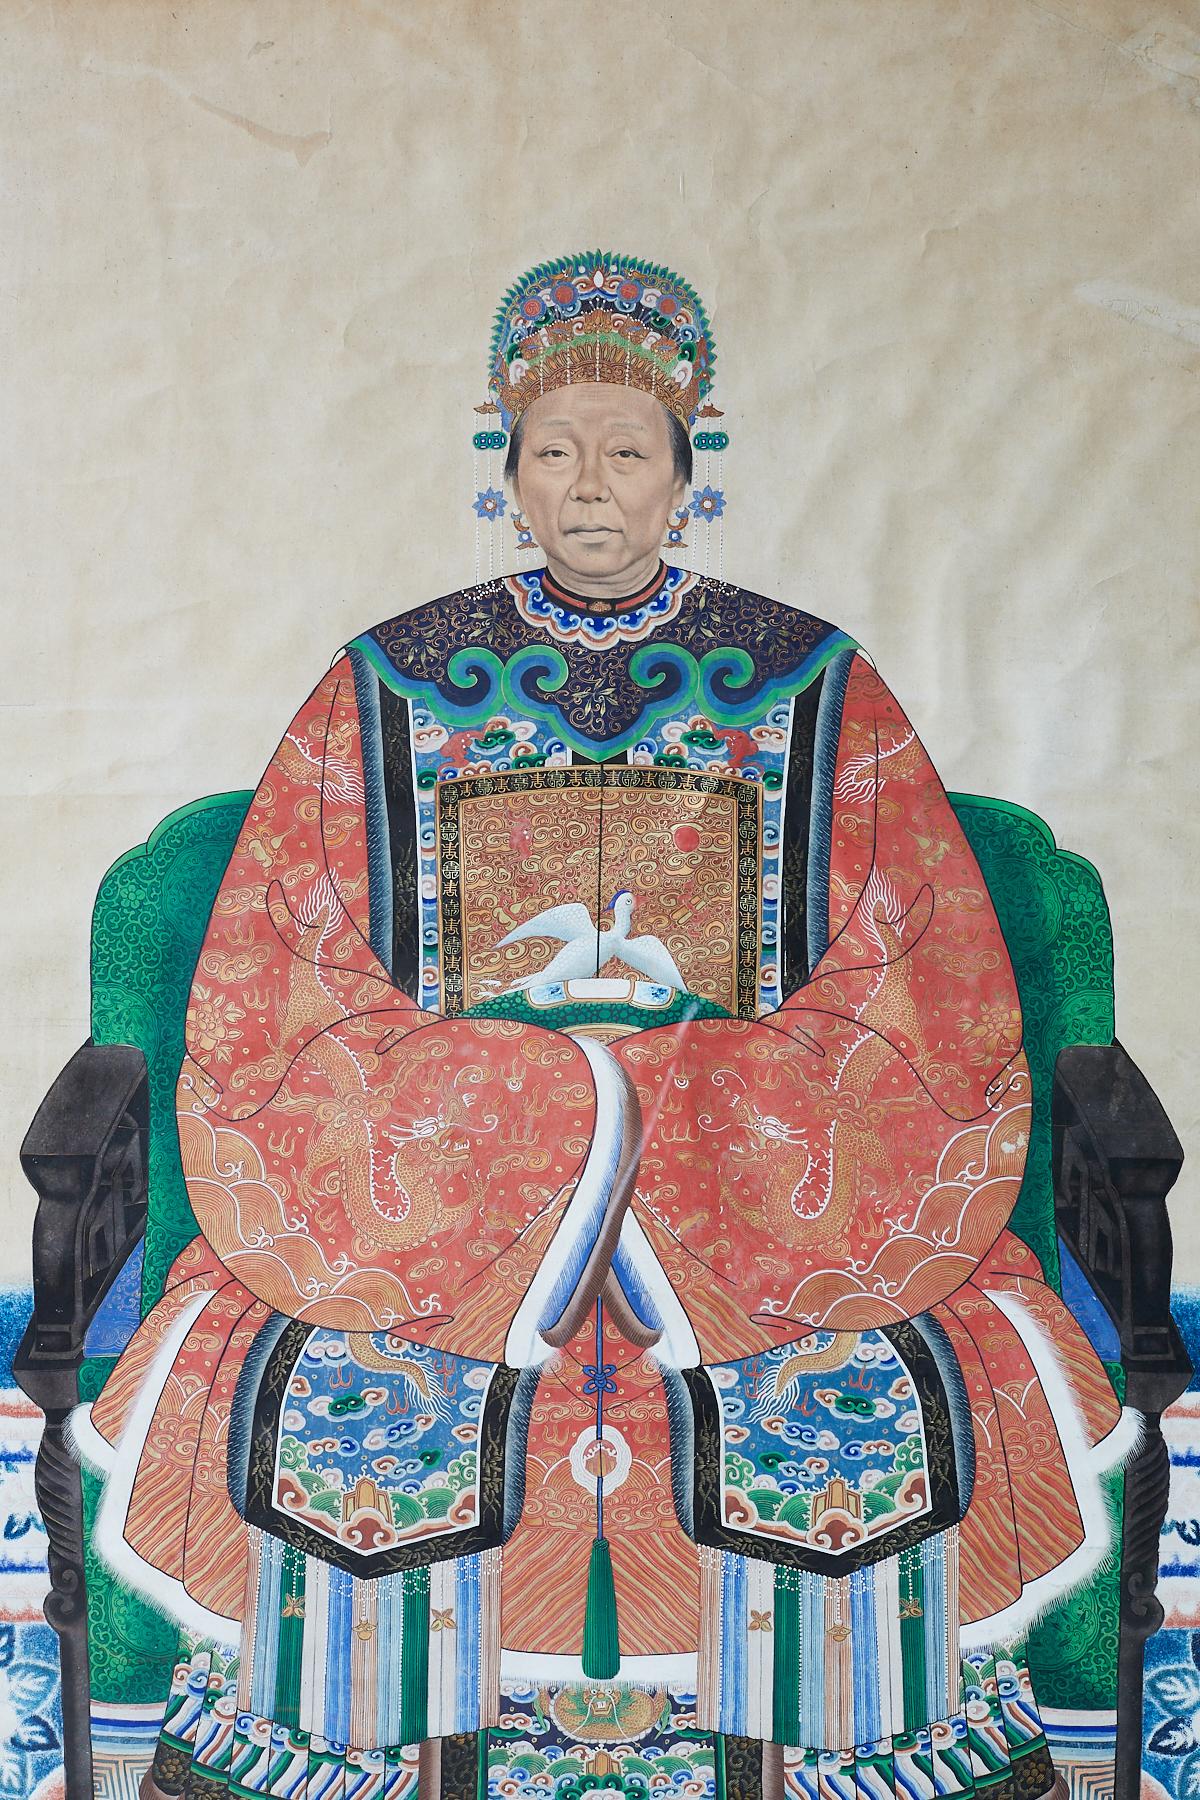 Large 19th century Qing dynasty ancestral matriarch scroll portrait painting. Features a matriarch in semi-formal ceremonial court attire decorated in vibrant colors. Depicted sitting on a carved chair wearing a robe with cranes, dragons, and